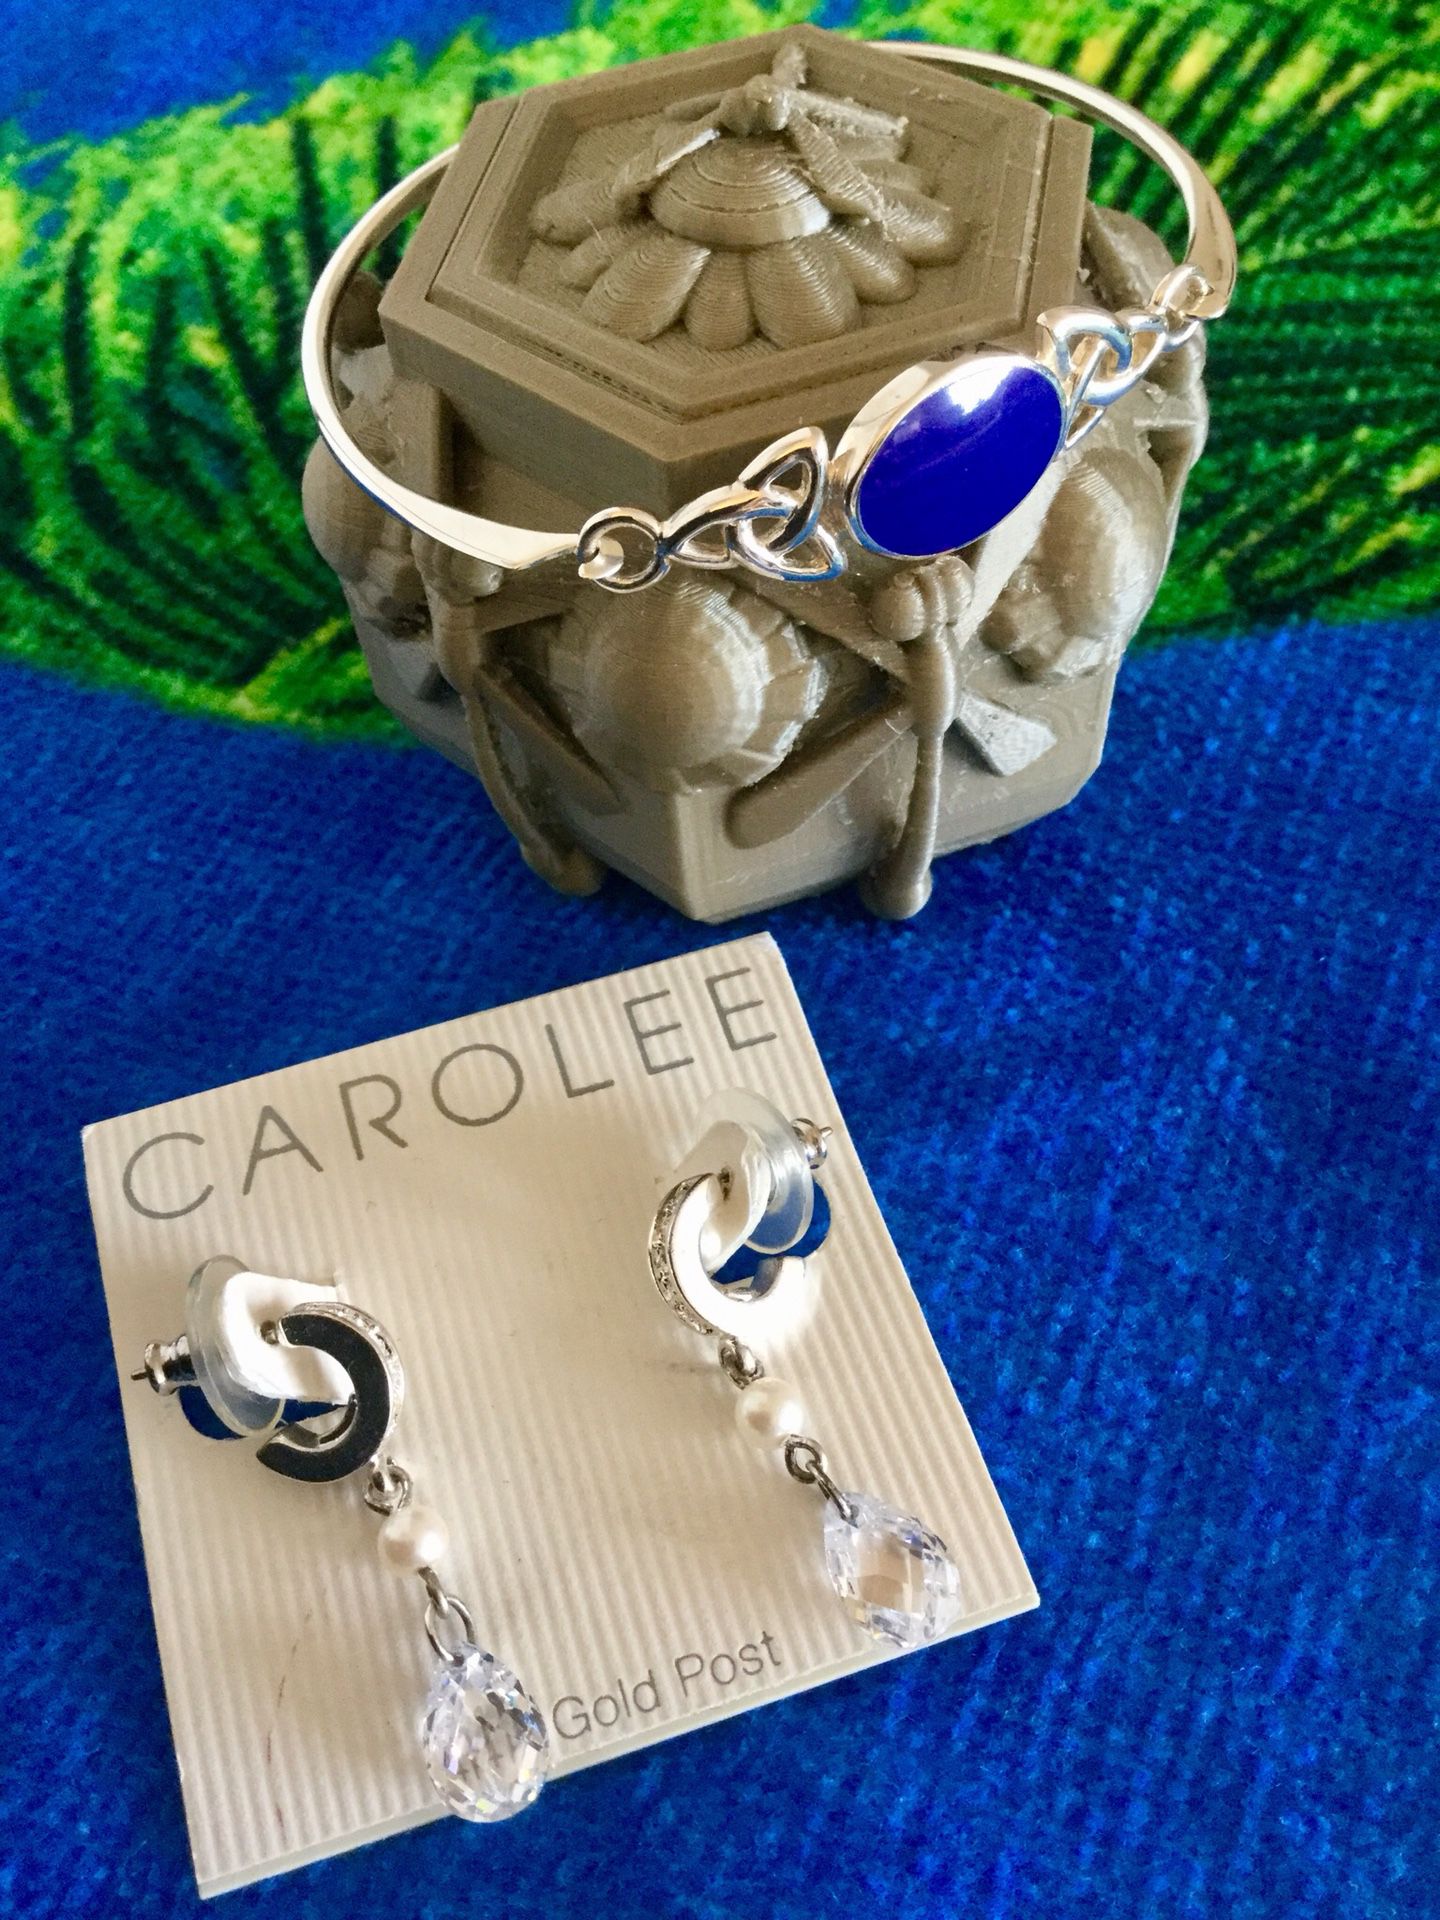 Beautiful Silver & crystals jewelry to chose from / Earrings $30 and Lapis gemstone Bracelet $35 🌿🦋🌿